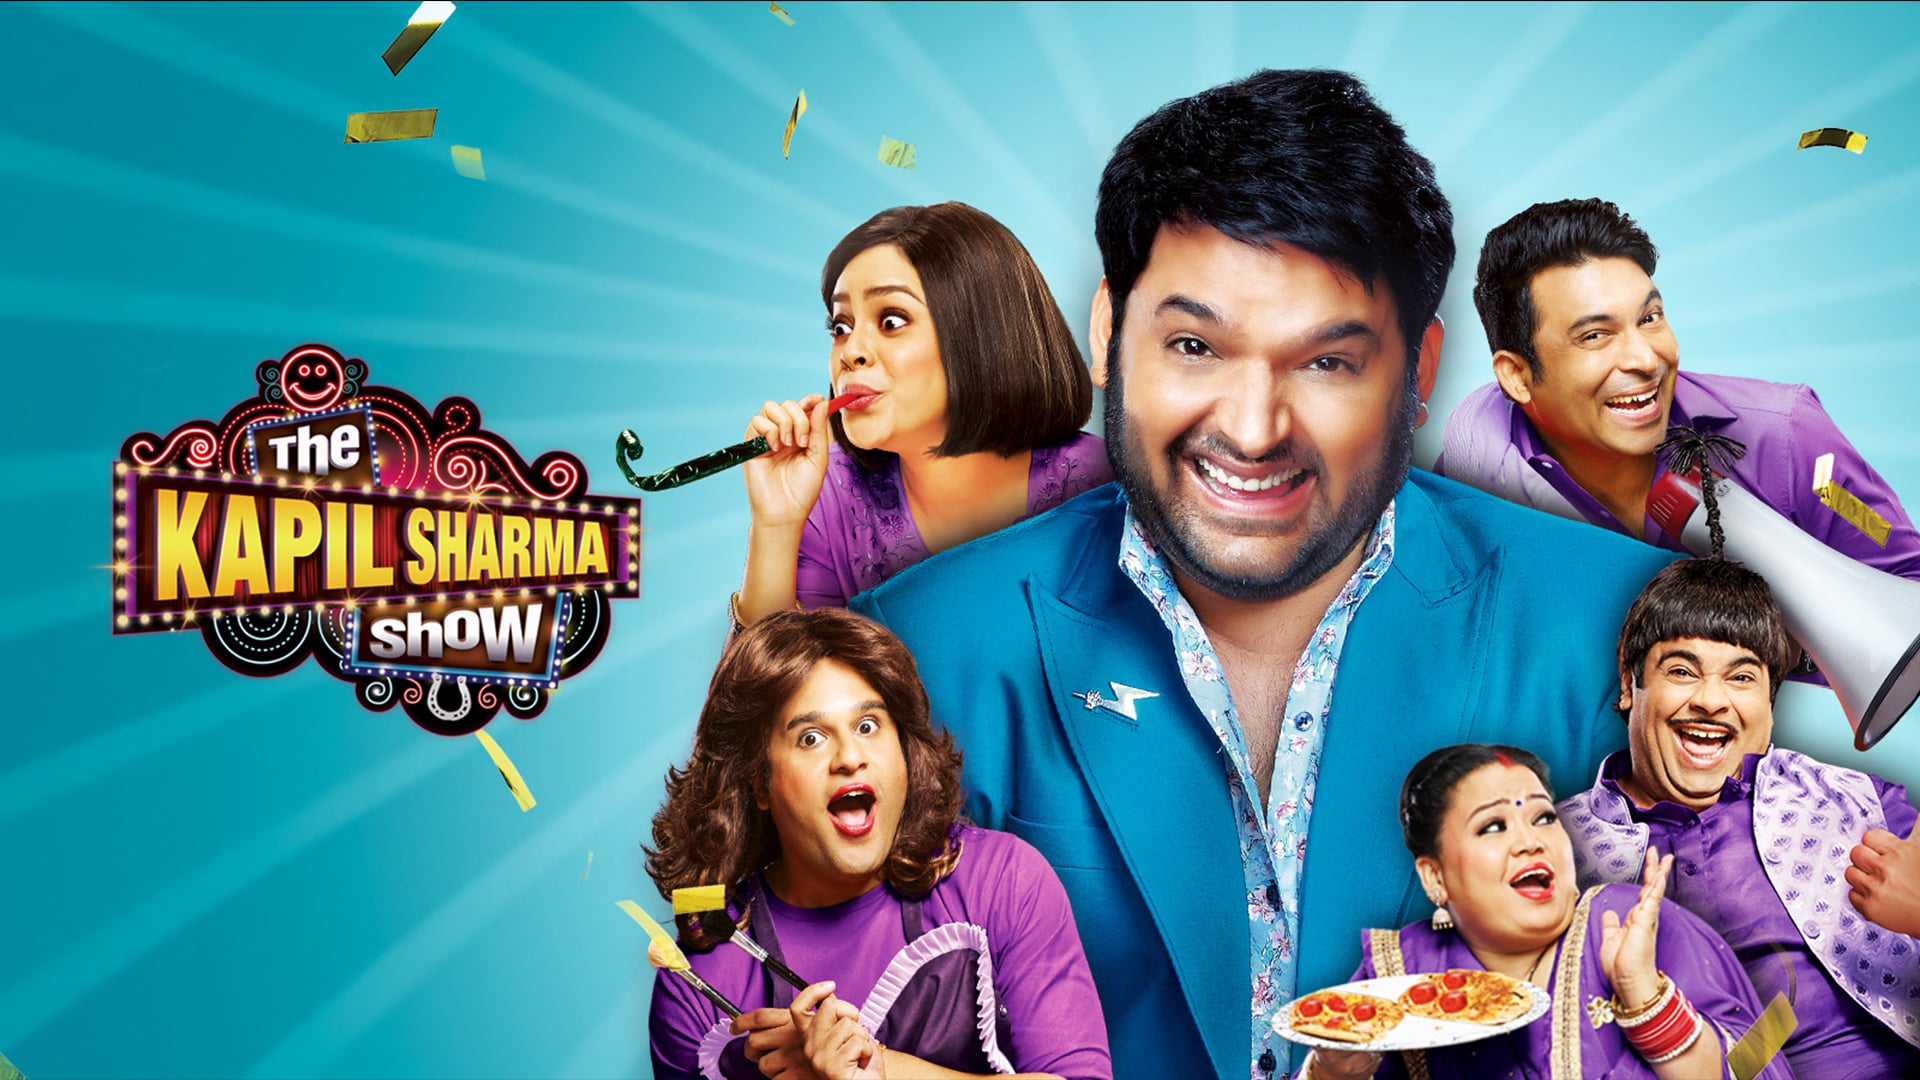 The Kapil Sharma Show - Season 2 Episode 75 : Welcoming The Cast Of The Zoya Factor